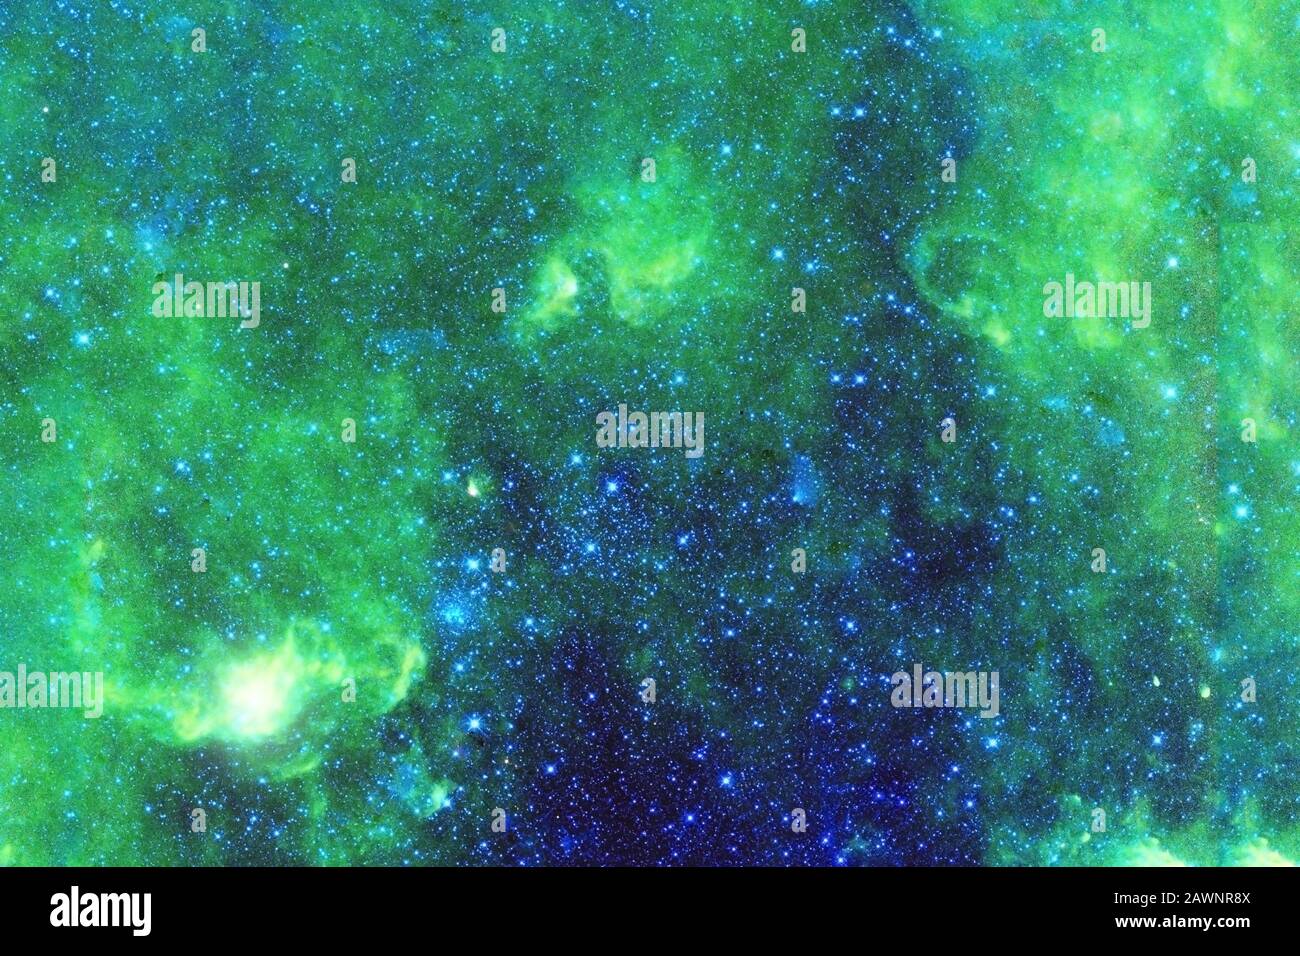 https://c8.alamy.com/comp/2AWNR8X/green-galaxy-deep-space-with-stars-elements-of-this-image-were-furnished-by-nasa-2AWNR8X.jpg